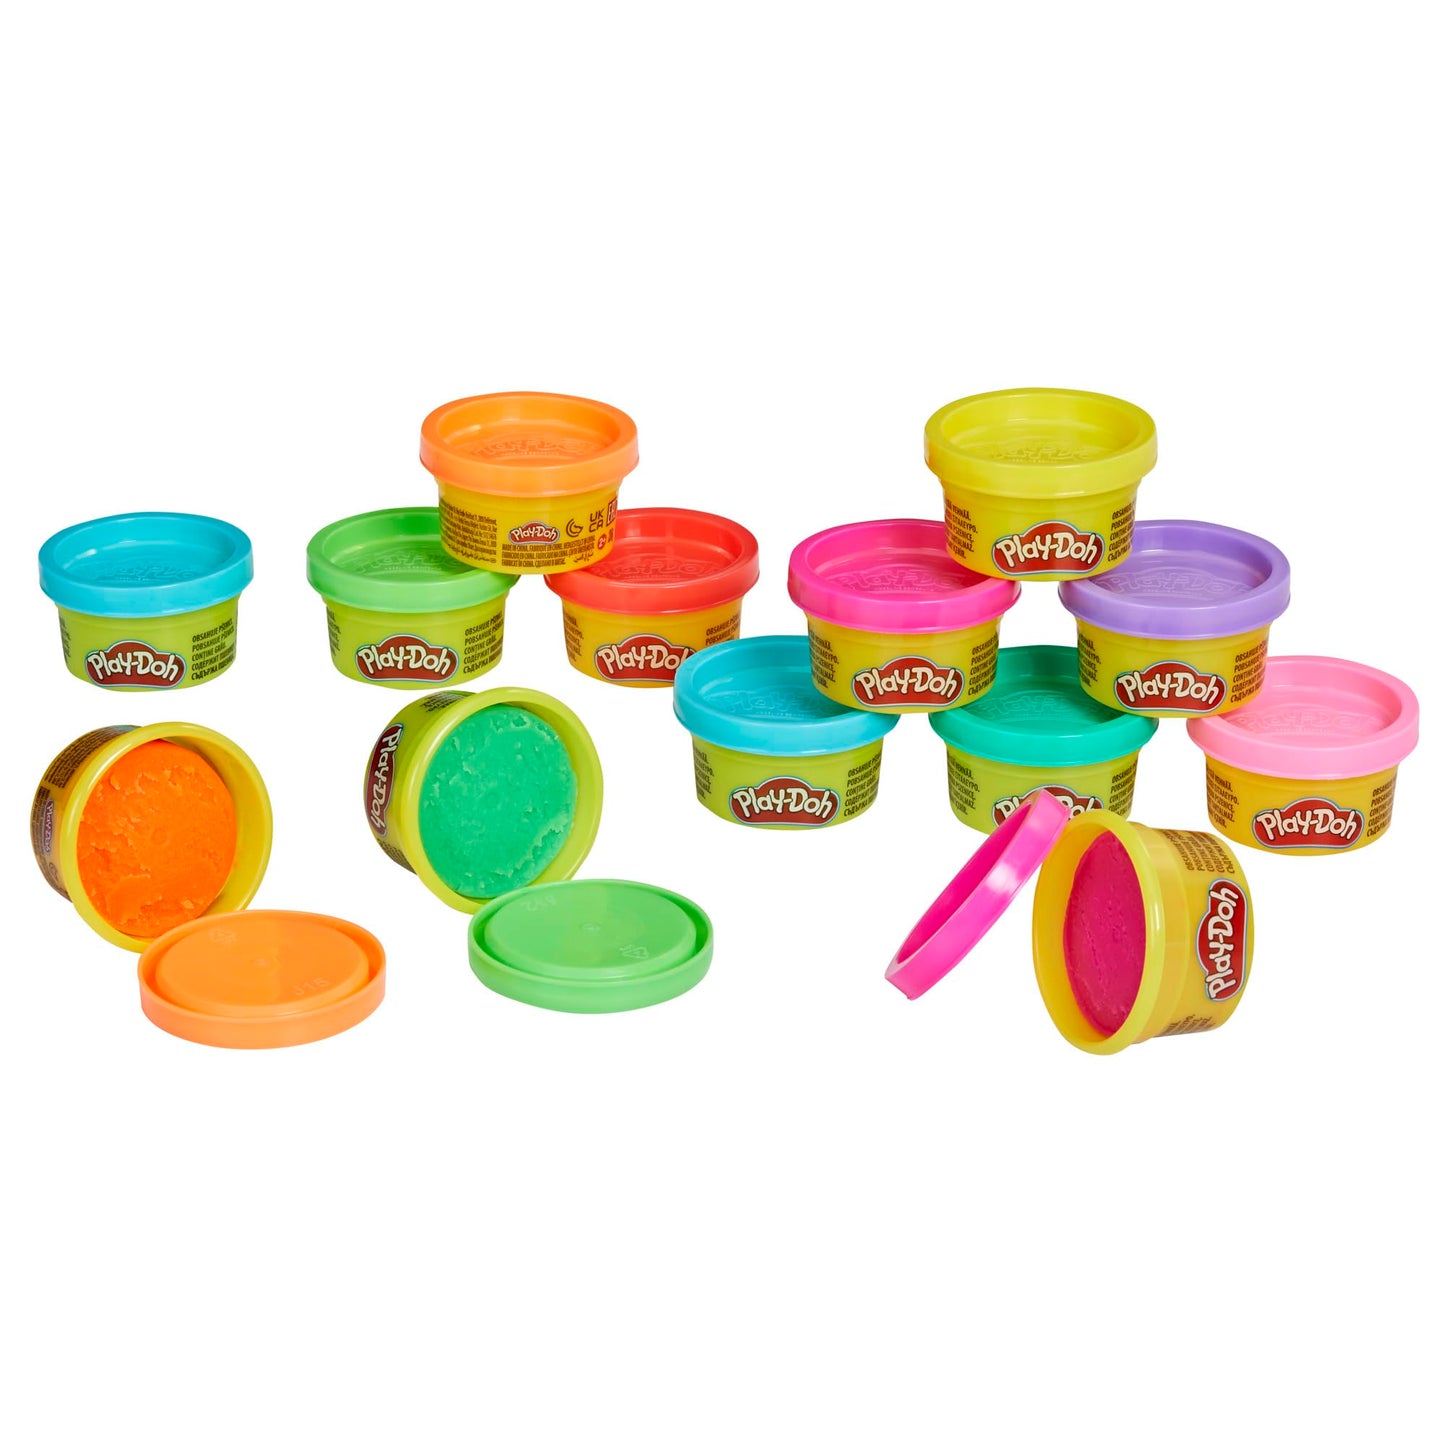 Play Doh Bulk Handout 42 Pack of 1-Ounce Modeling Compound, Party Favors, Kids Easter Basket Stuffers or Egg Fillers, Ages 2+ (Amazon Exclusive)